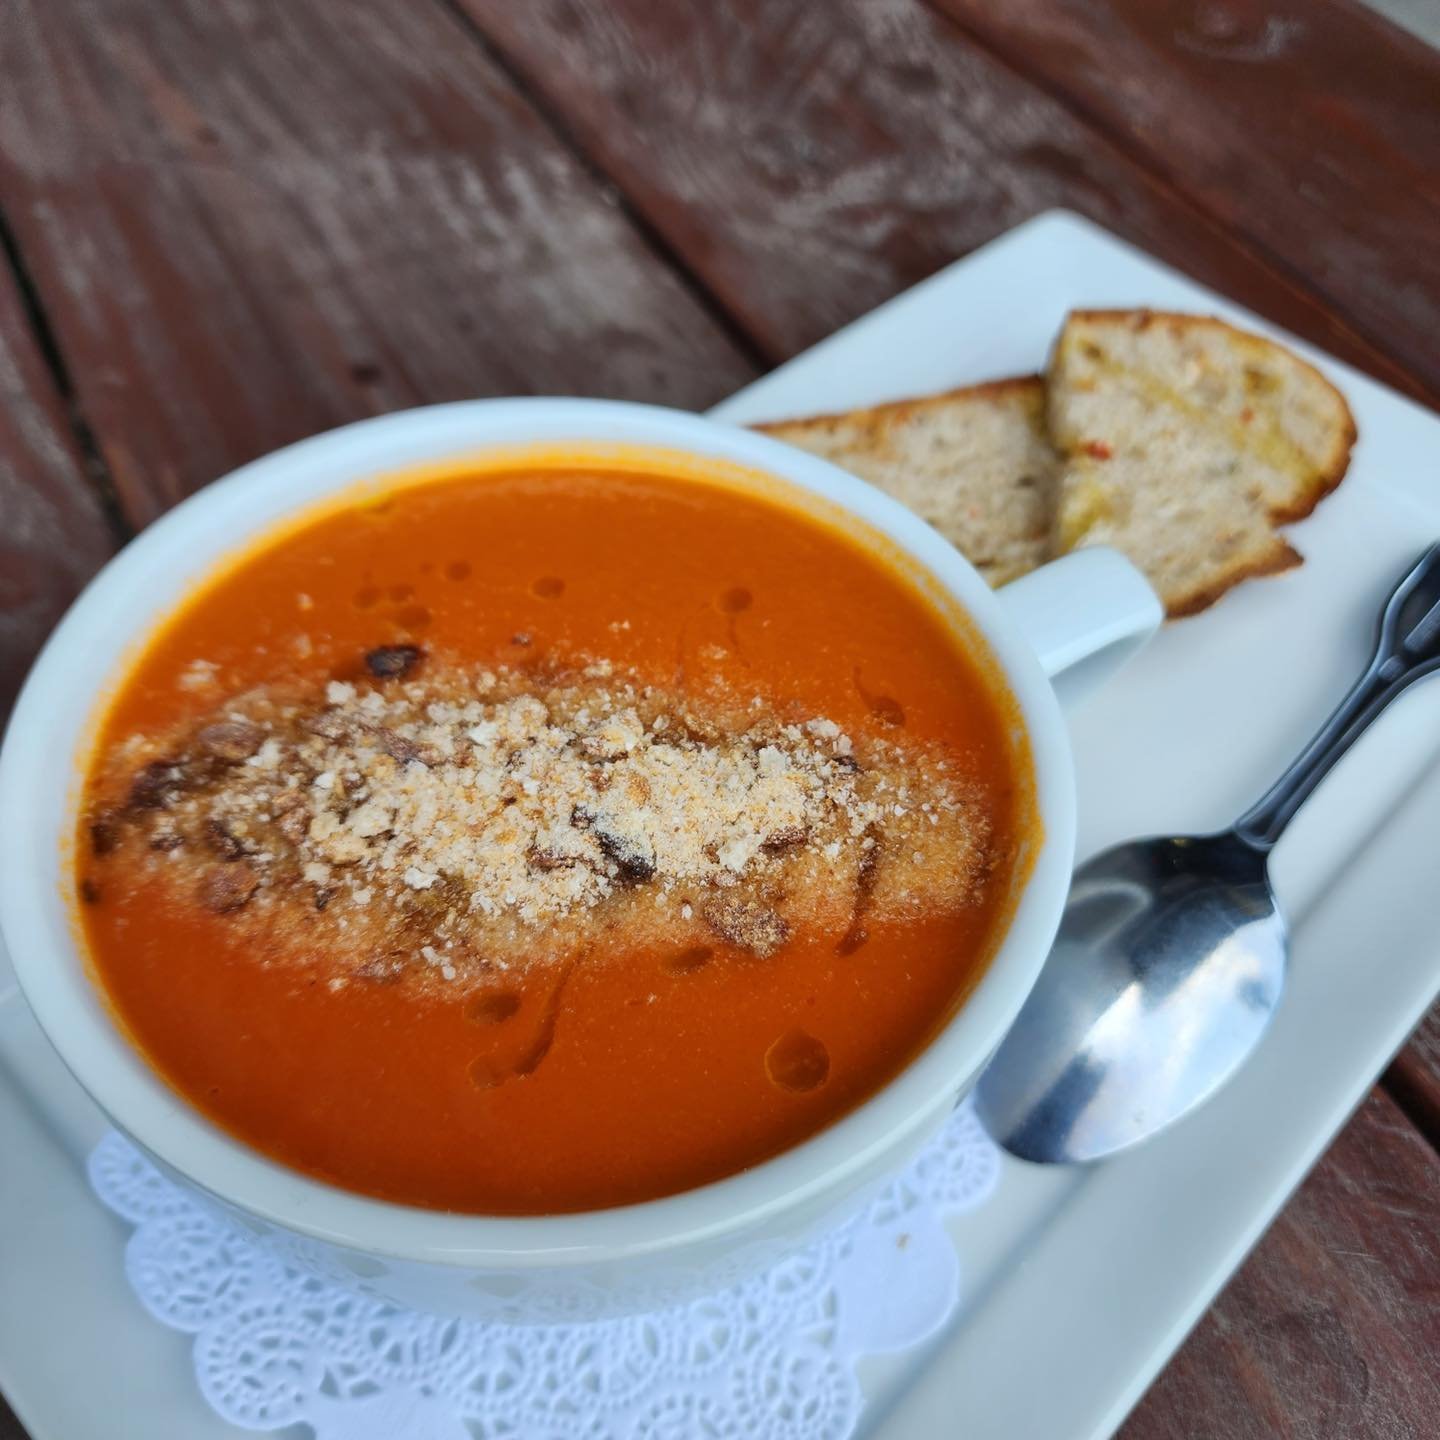 Have you tried our house made tomato soup? Served with a side of toasted sourdough. It&rsquo;s warm, creamy, and delicious. And it&rsquo;s vegan! But trust me, you&rsquo;d never know.